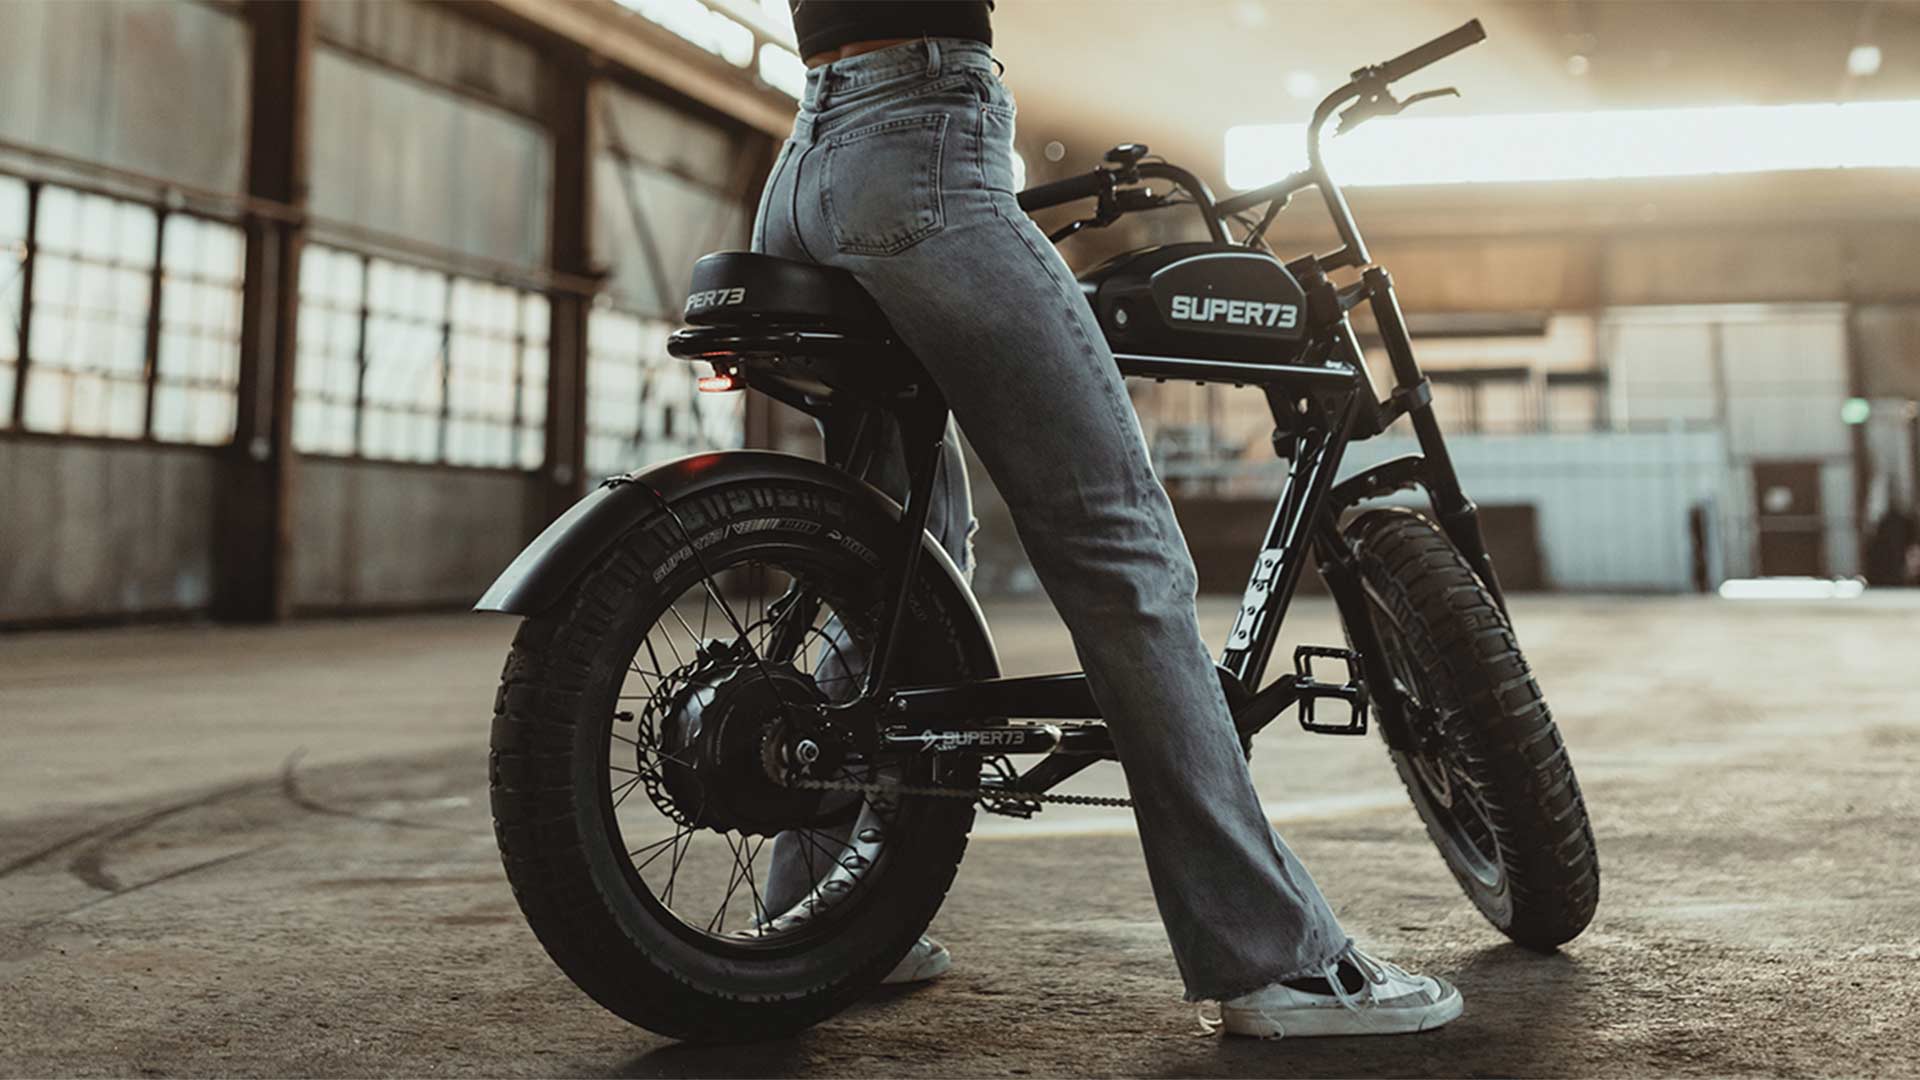 Rider in jeans sitting on Super73 S2 ebike in the middle of a warehouse